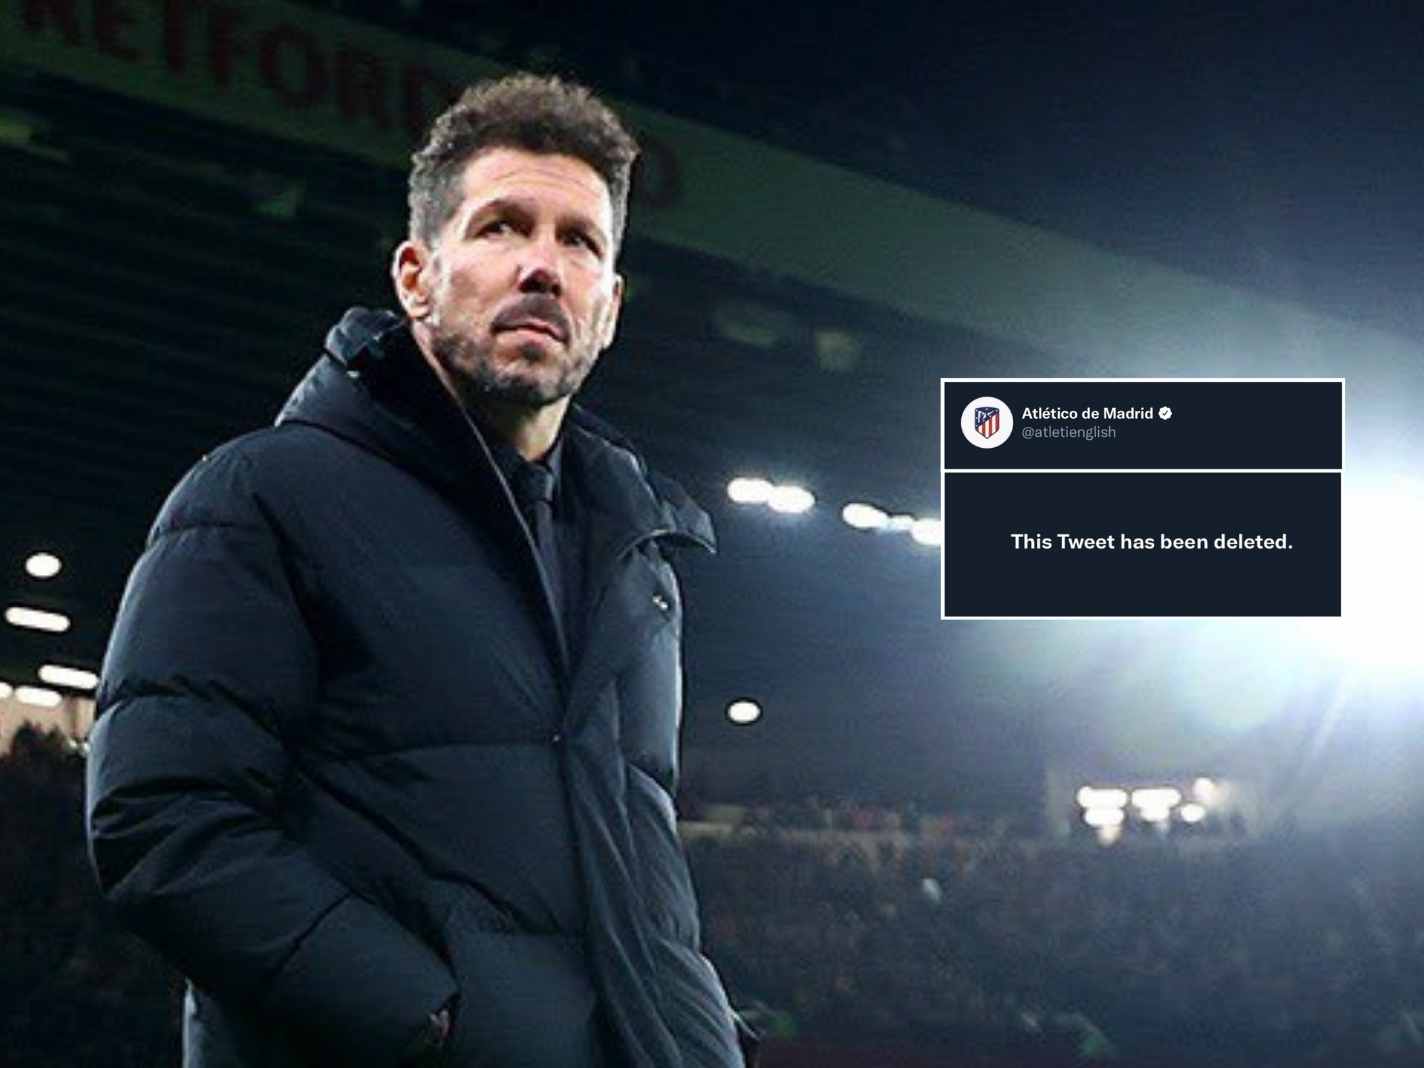 Atletico catch Man United off guard with 2 great tweets, one of which was deleted